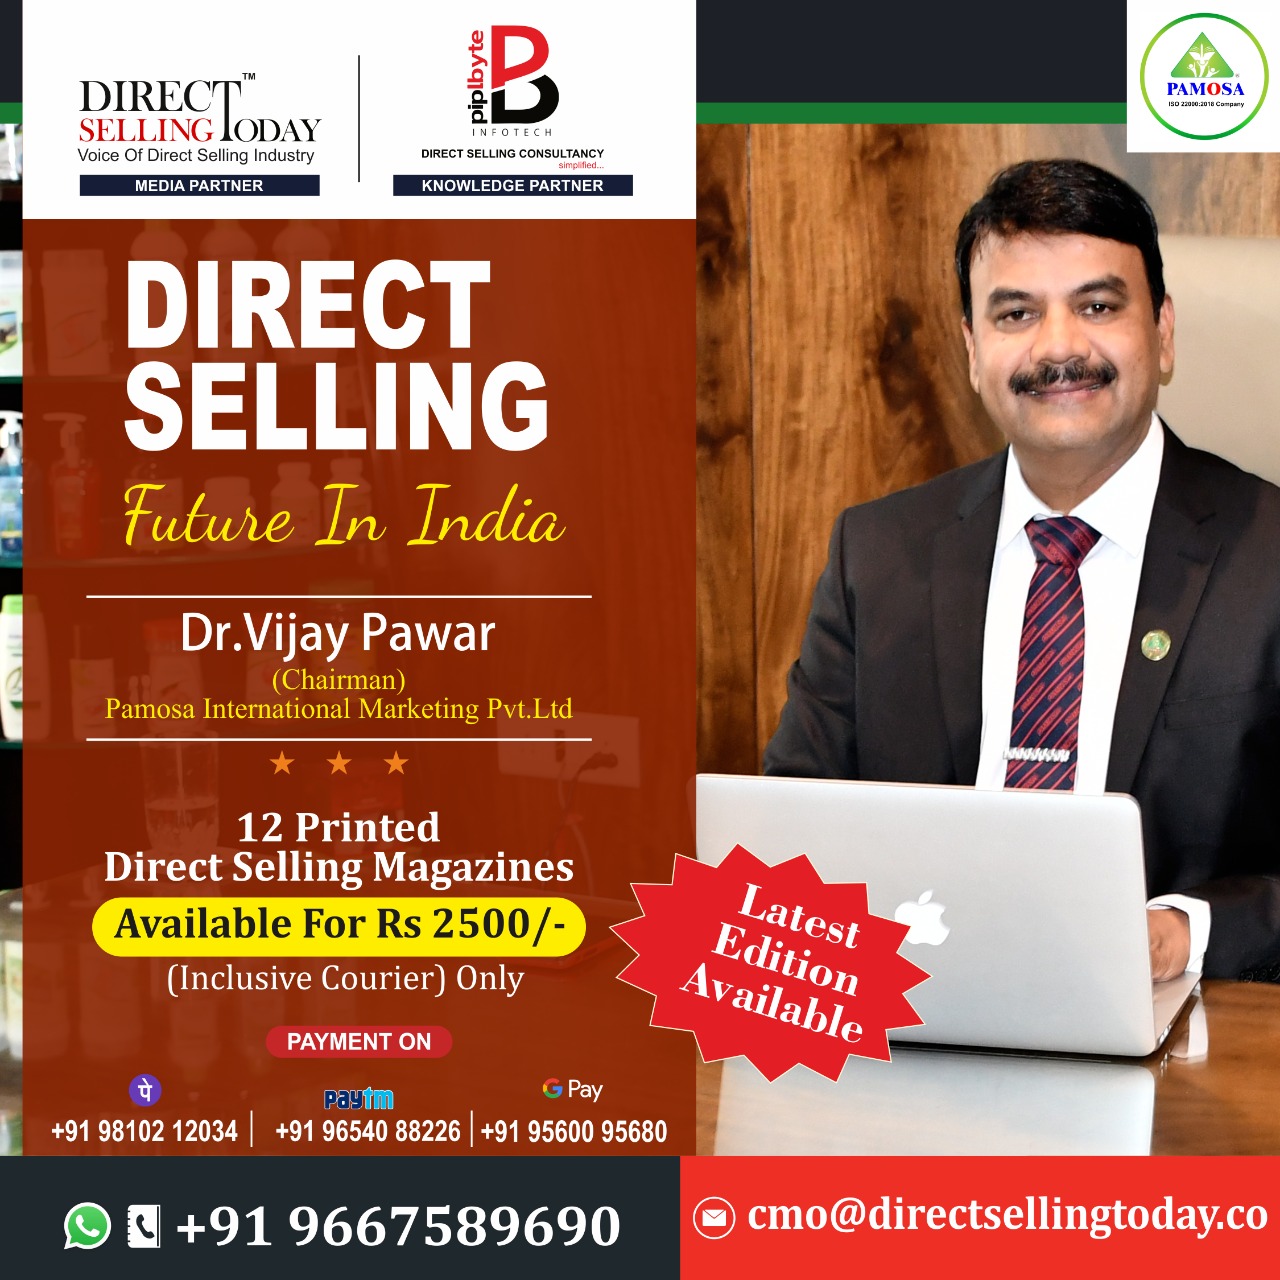 DIRECT SELLING FUTURE IN INDIA